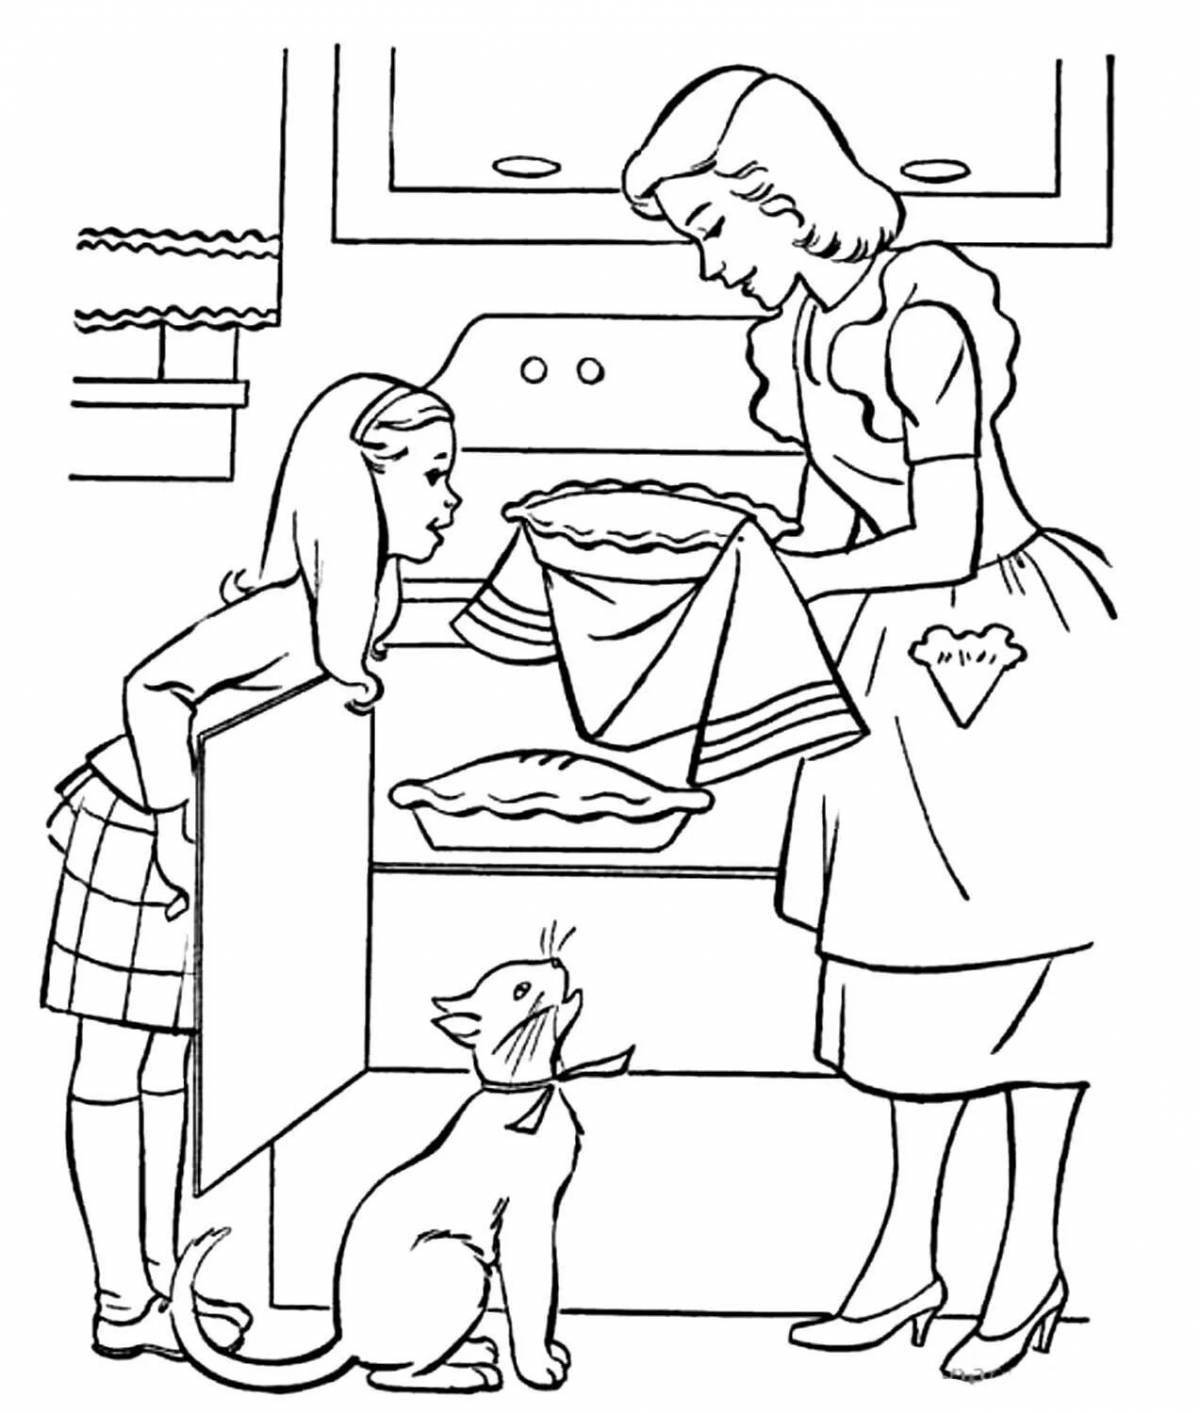 Coloring page precious mother and daughter